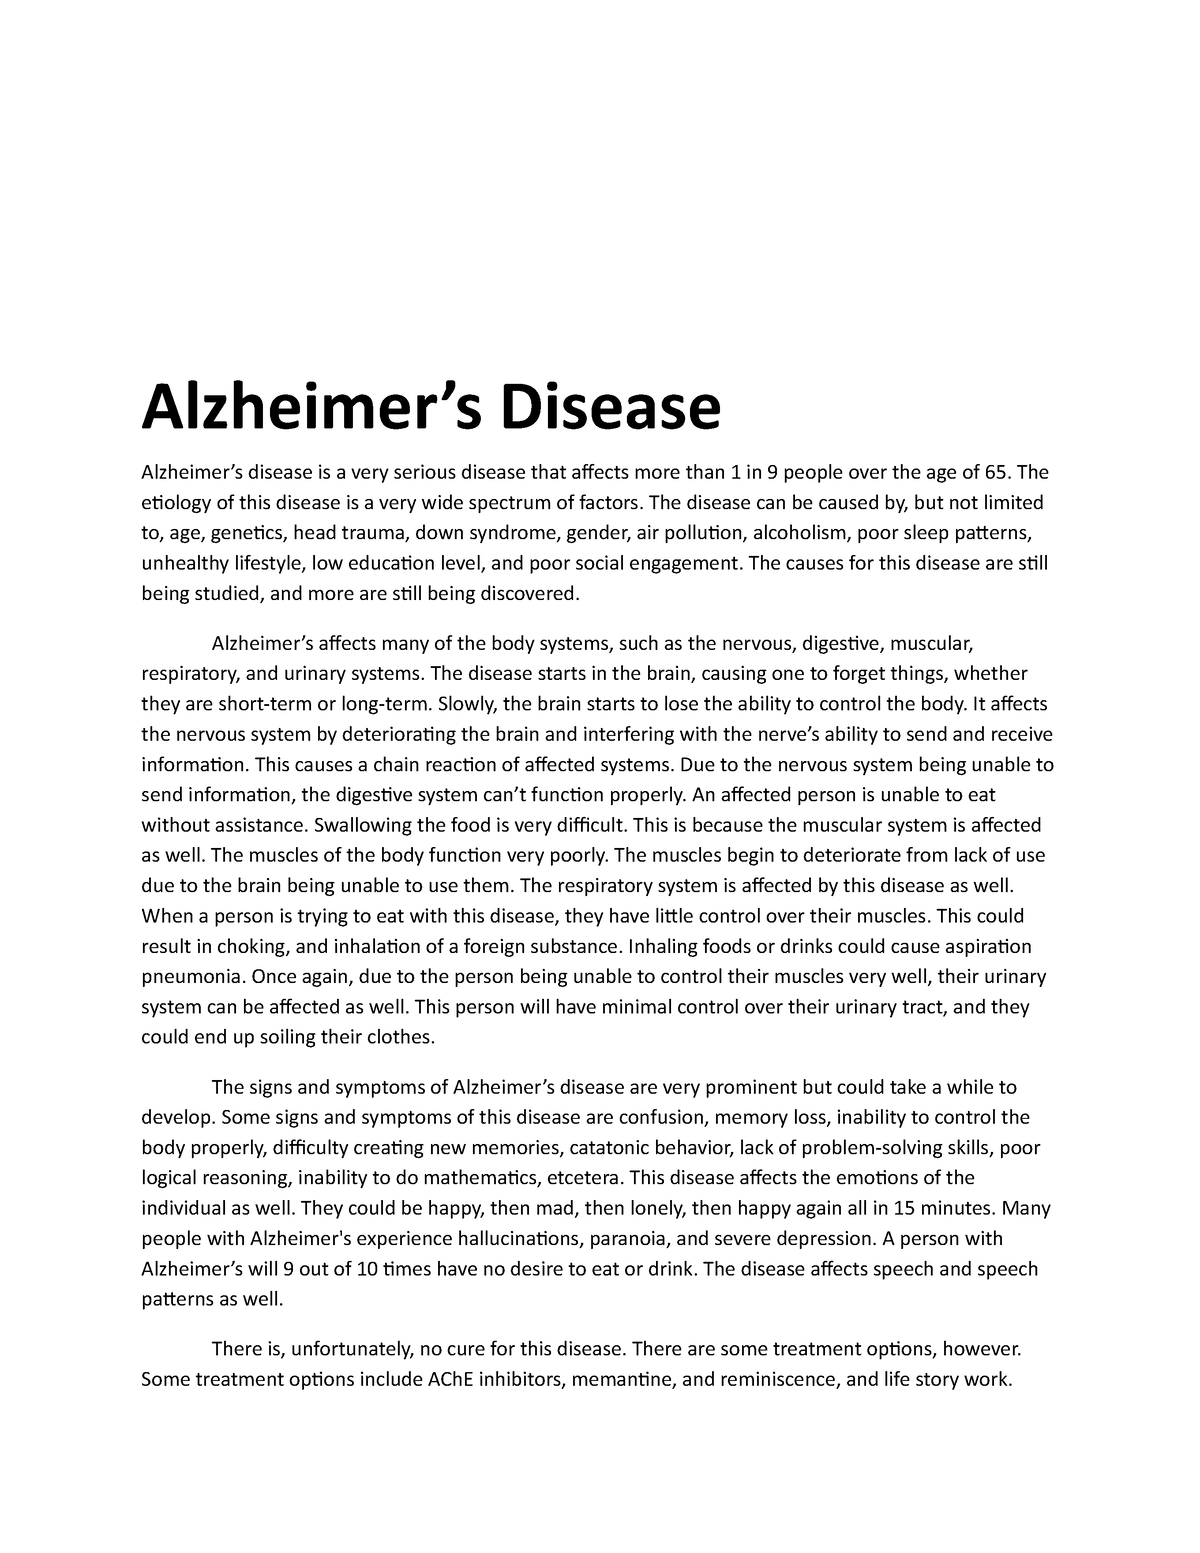 conclusion of alzheimer's disease essay